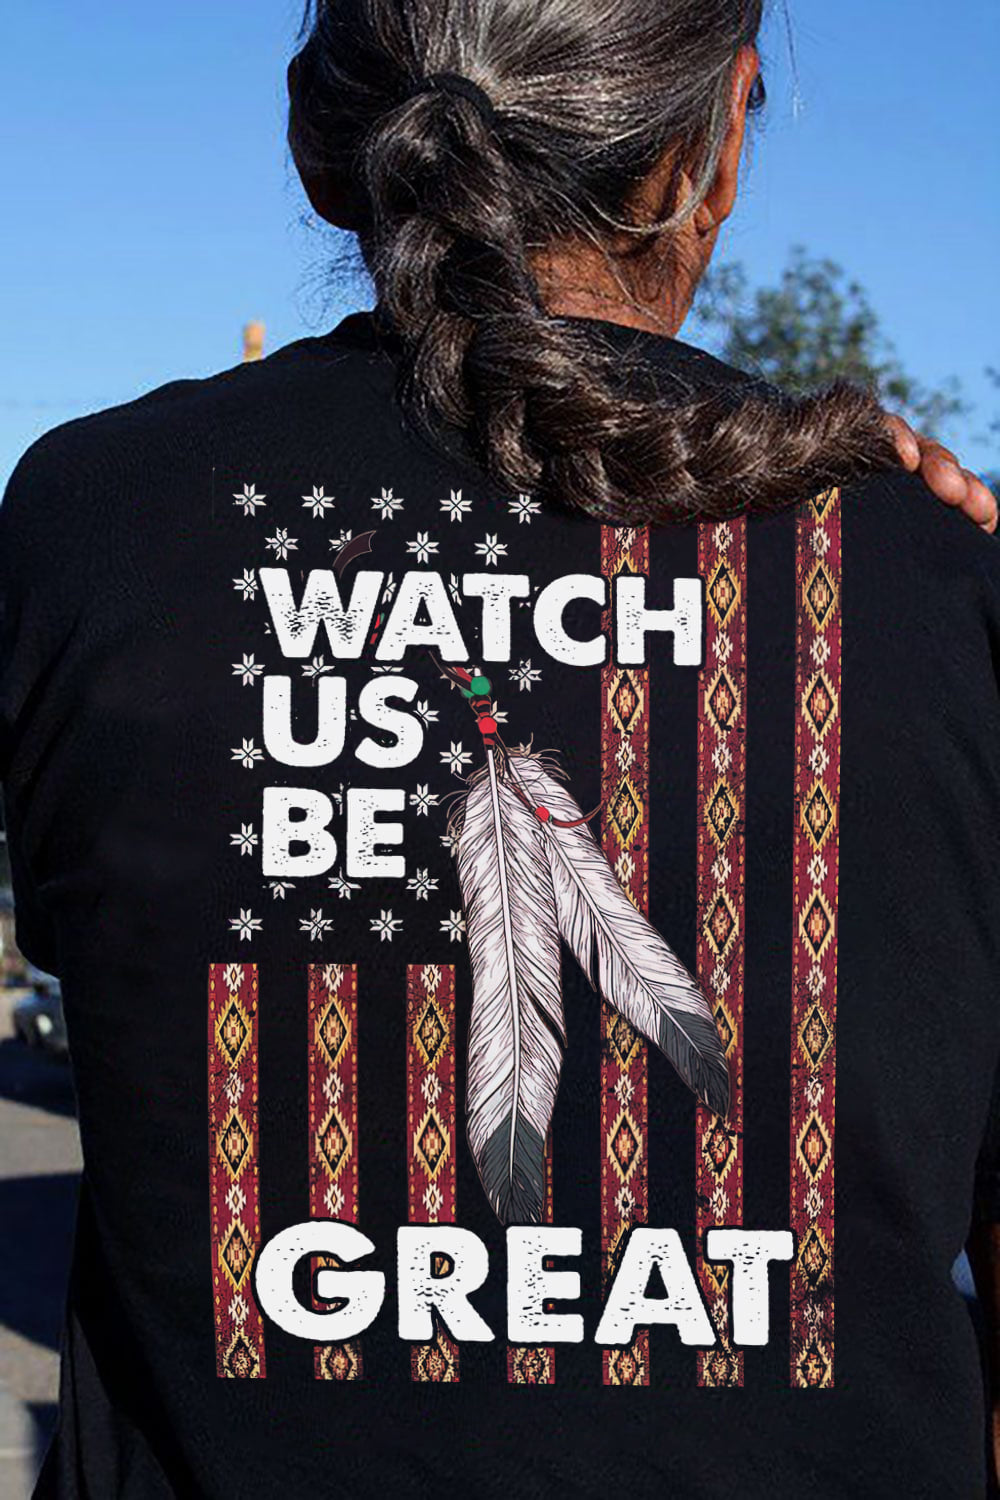 Watch us be great - Native American, America flag